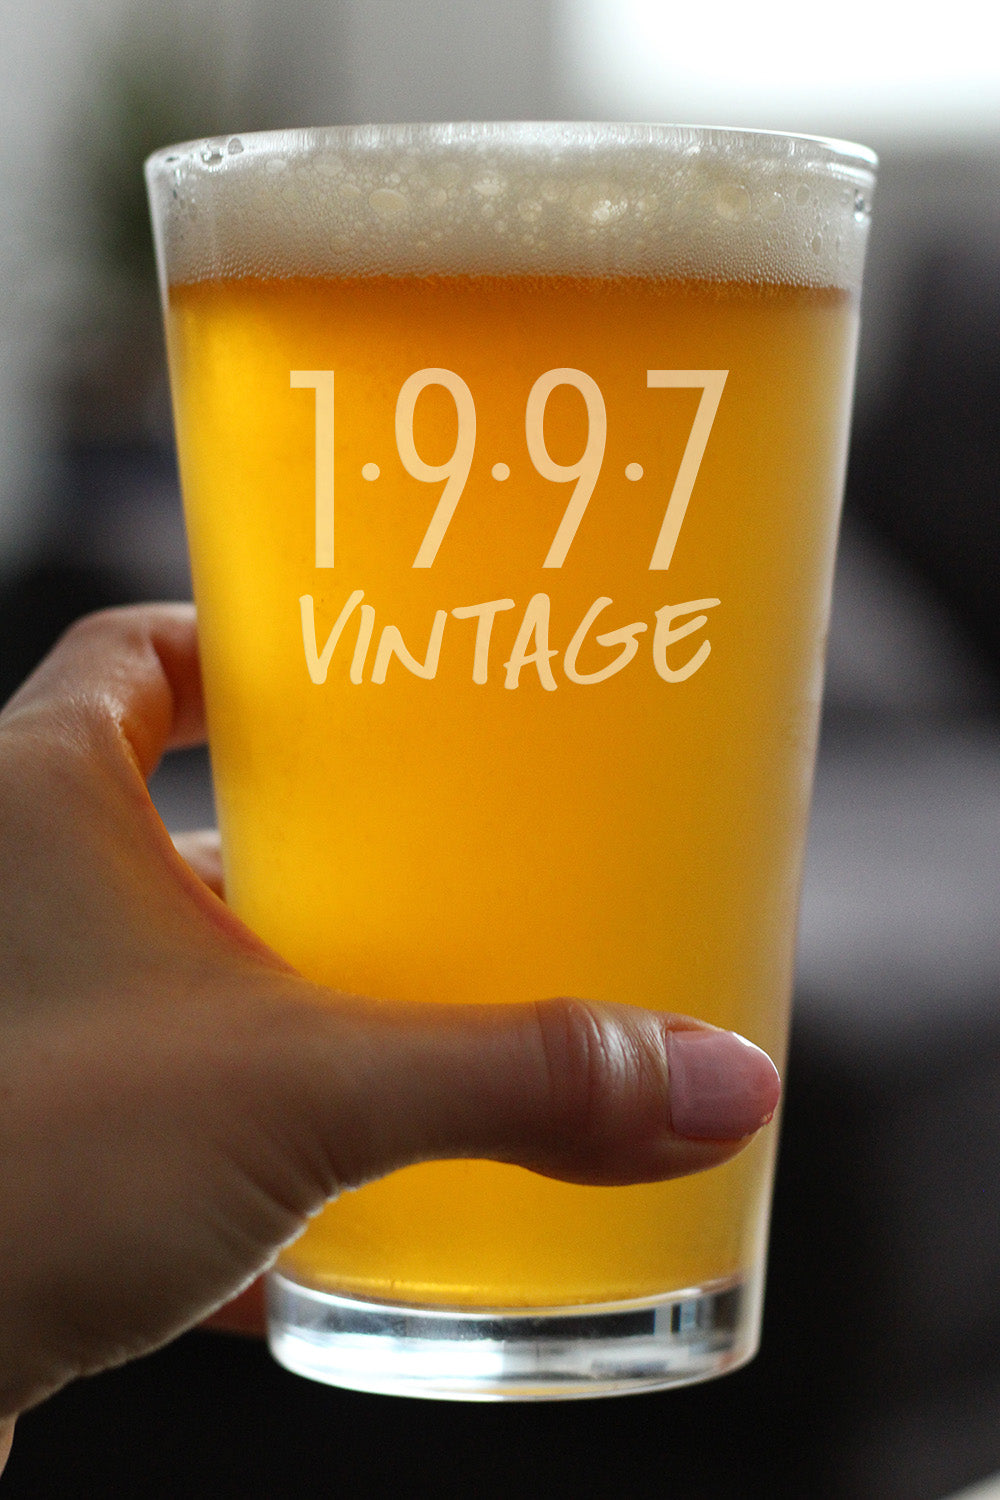 Vintage 1997 - Pint Glass for Beer - 27th Birthday Gifts for Men or Women Turning 27 - Fun Bday Party Decor - 16 oz